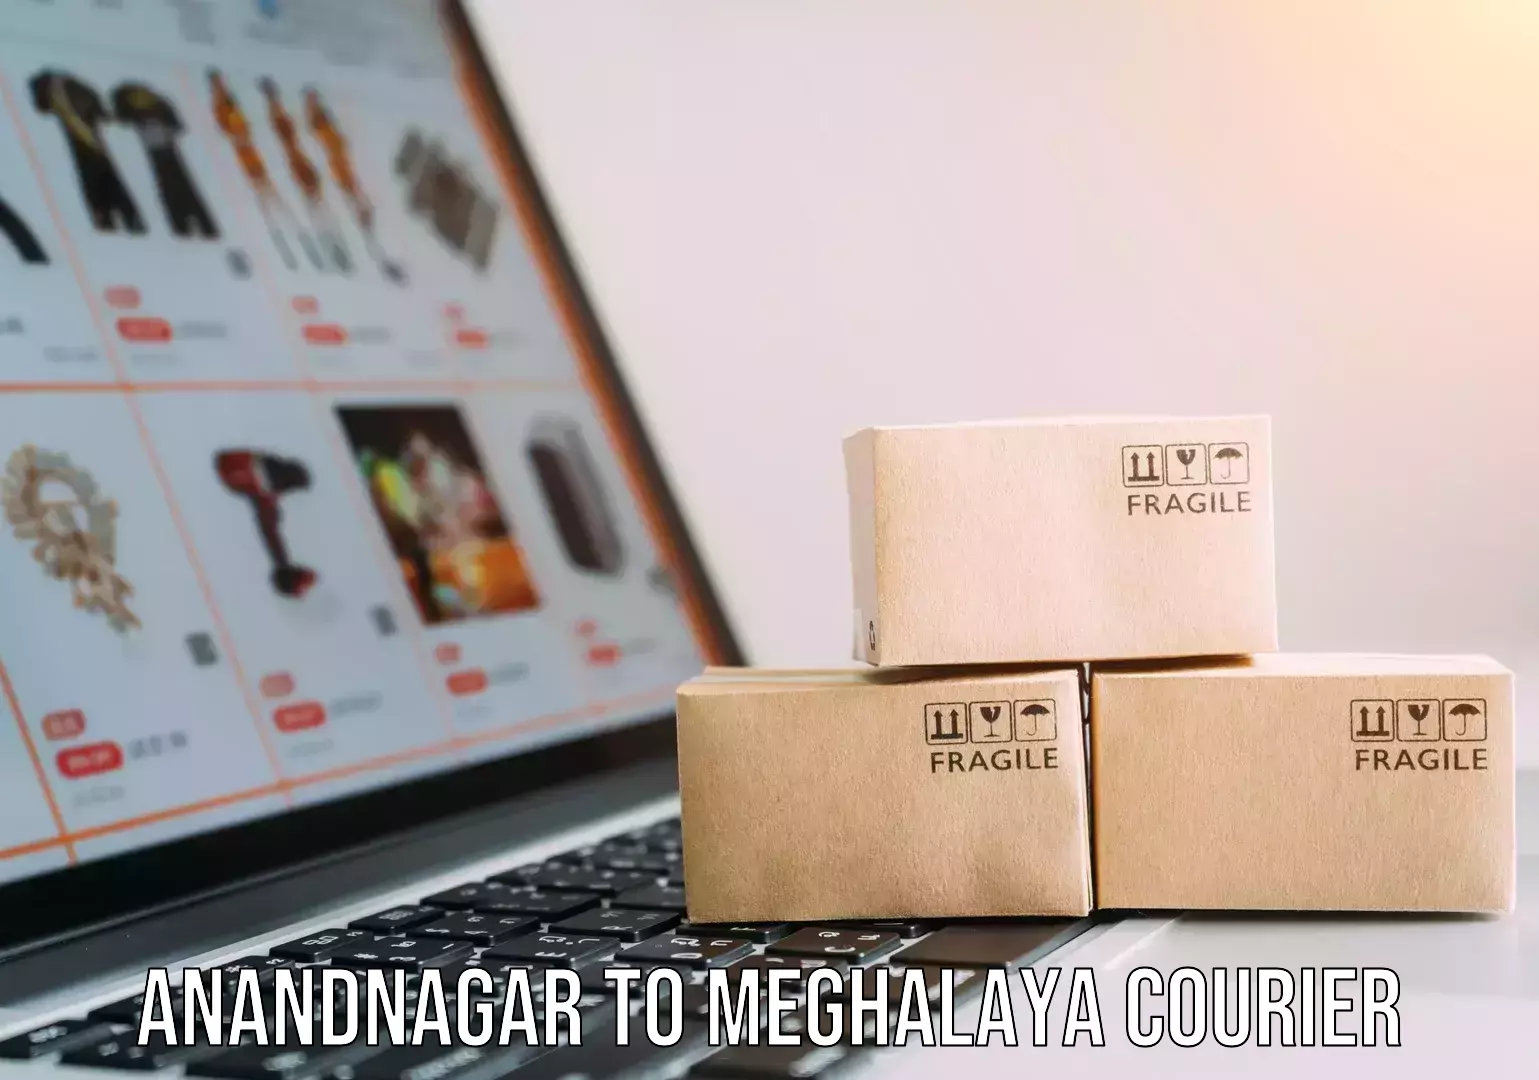 Efficient package consolidation Anandnagar to Meghalaya